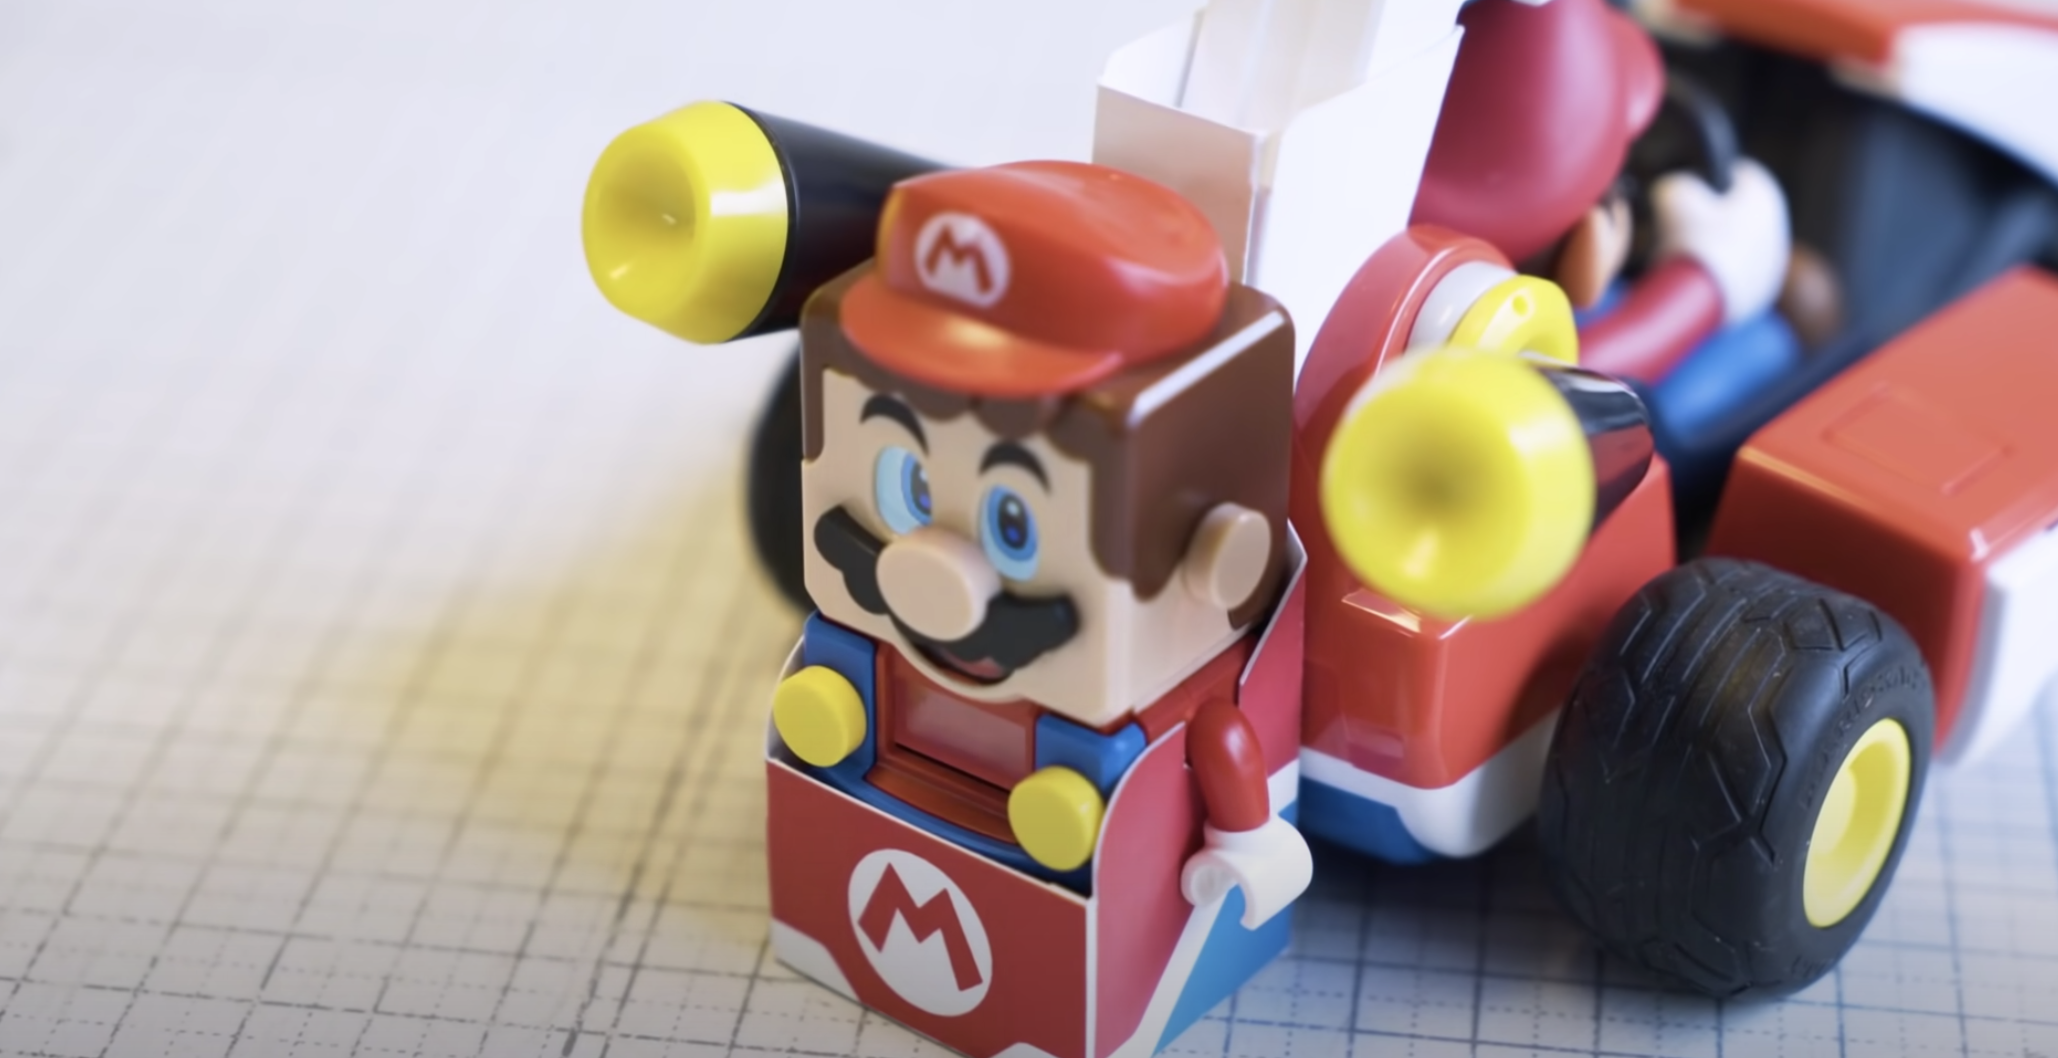 Lego Mario Kart: Home Circuit combo is the best video you'll see today